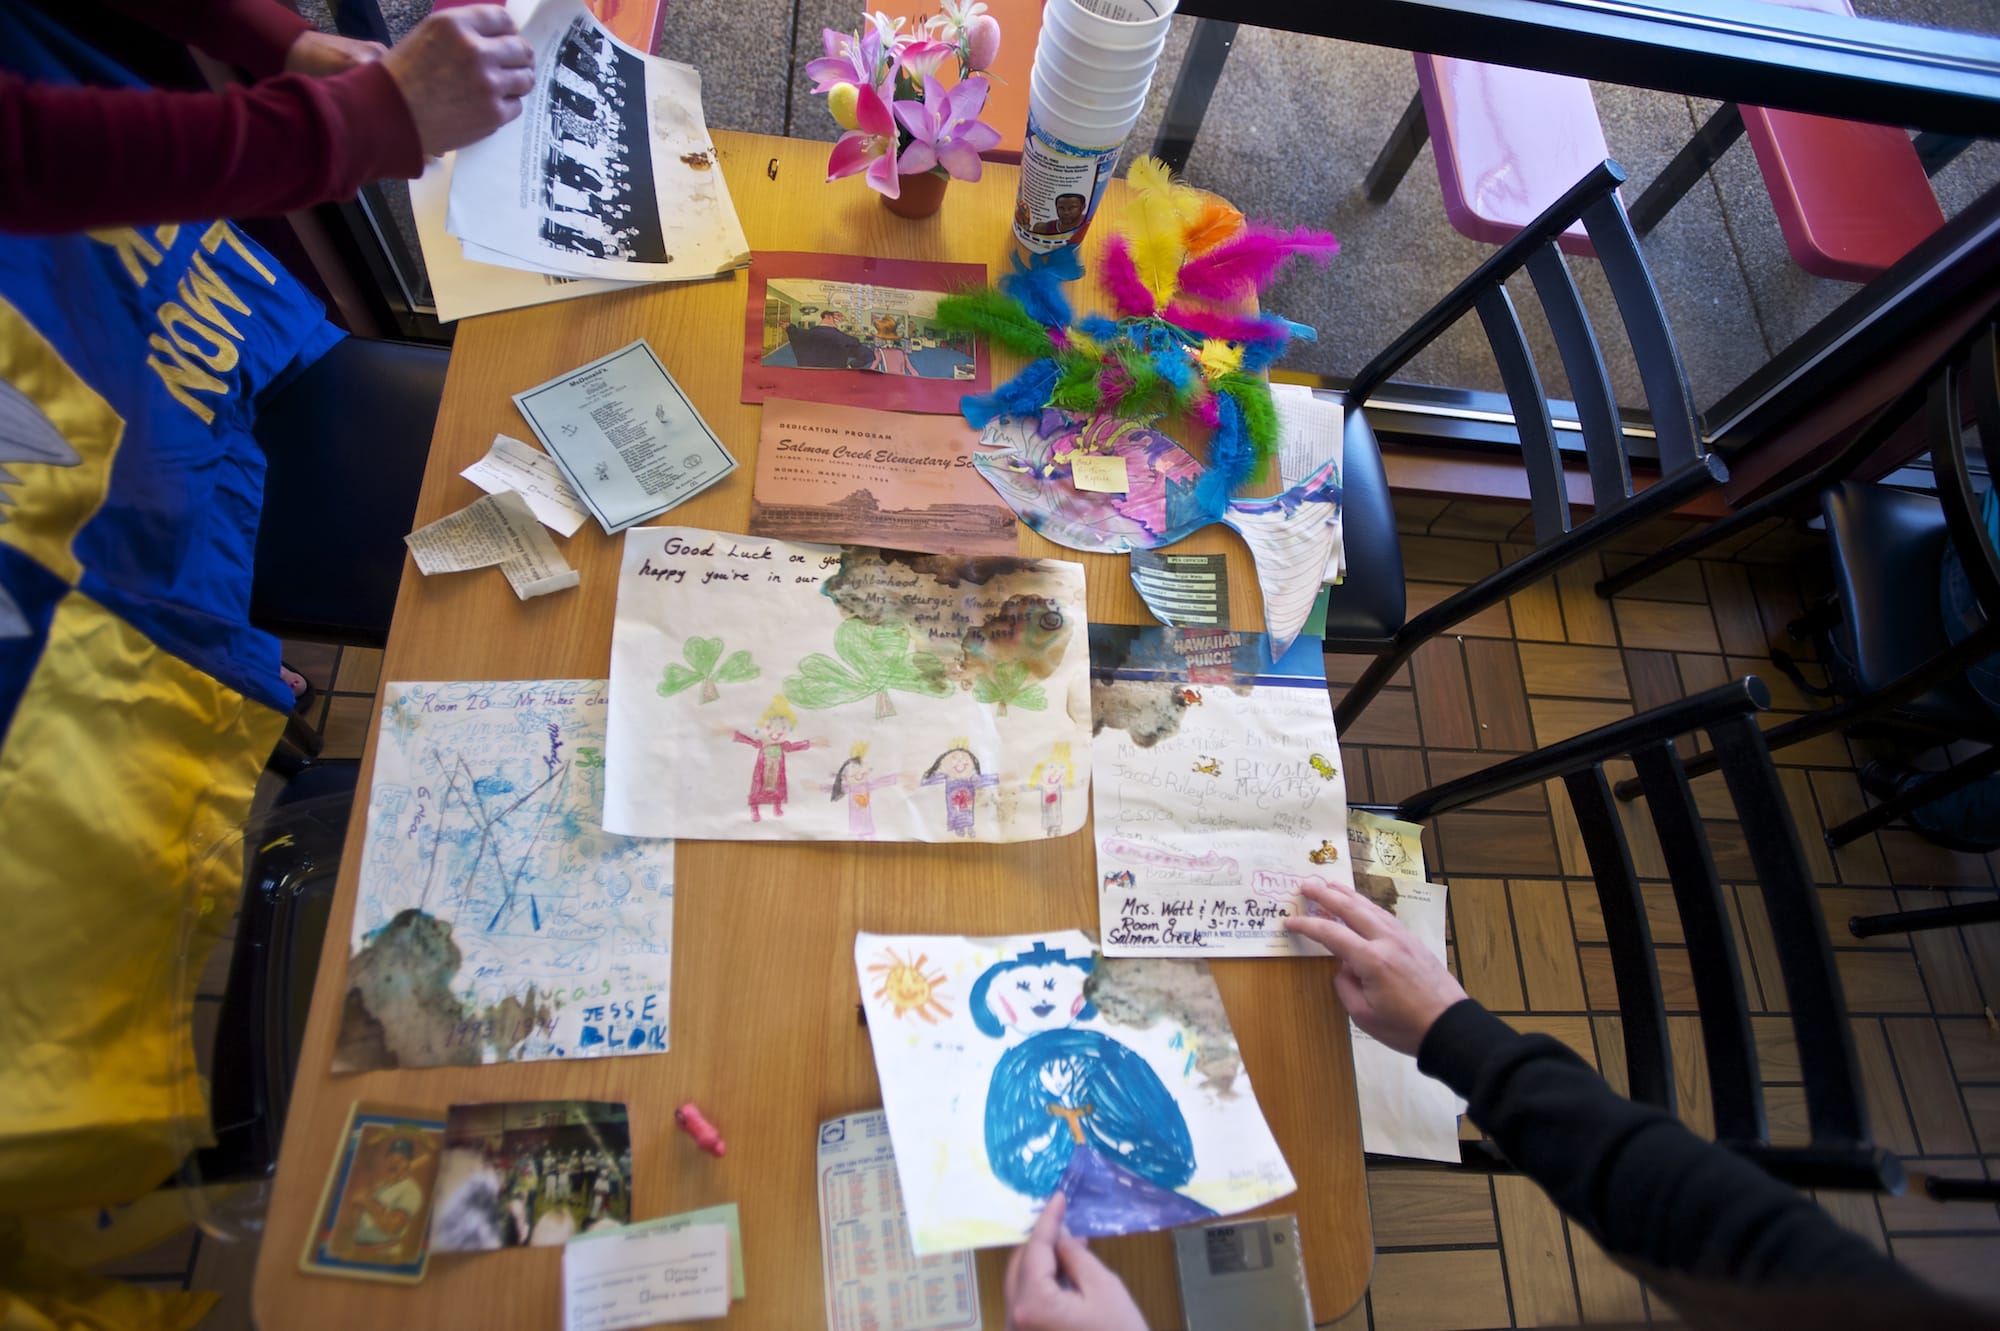 Items unearthed from a time capsule that Salmon Creek Elementary School students and staff buried in 1994 are displayed Sunday at the McDonald's in Salmon Creek.